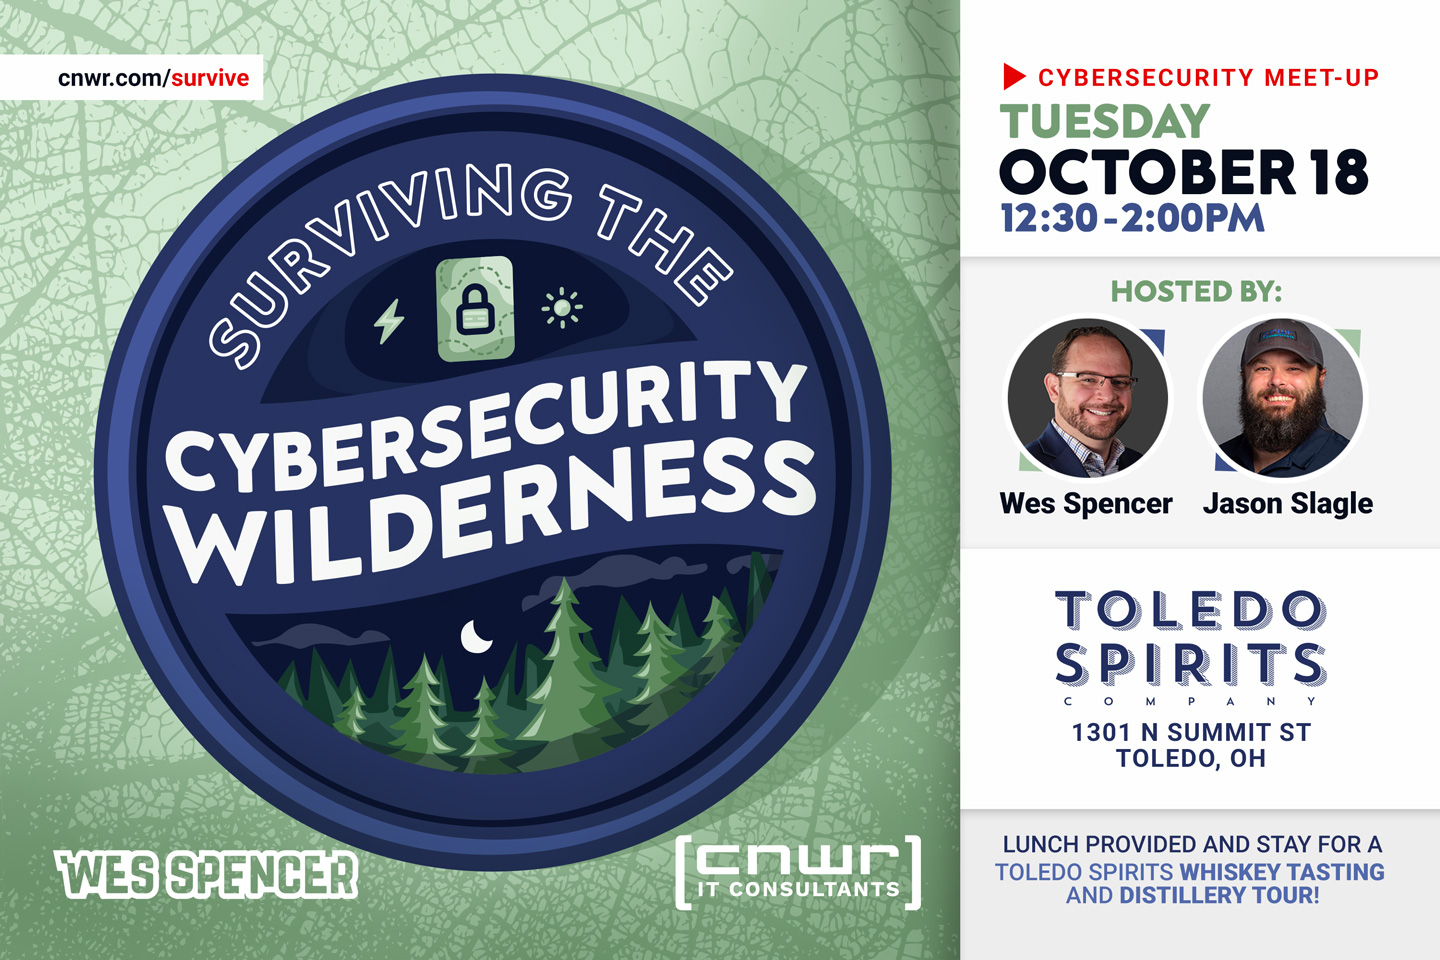 surving the cybersecurity wilderness with Jason Slagle and Wes Spencer Invitation